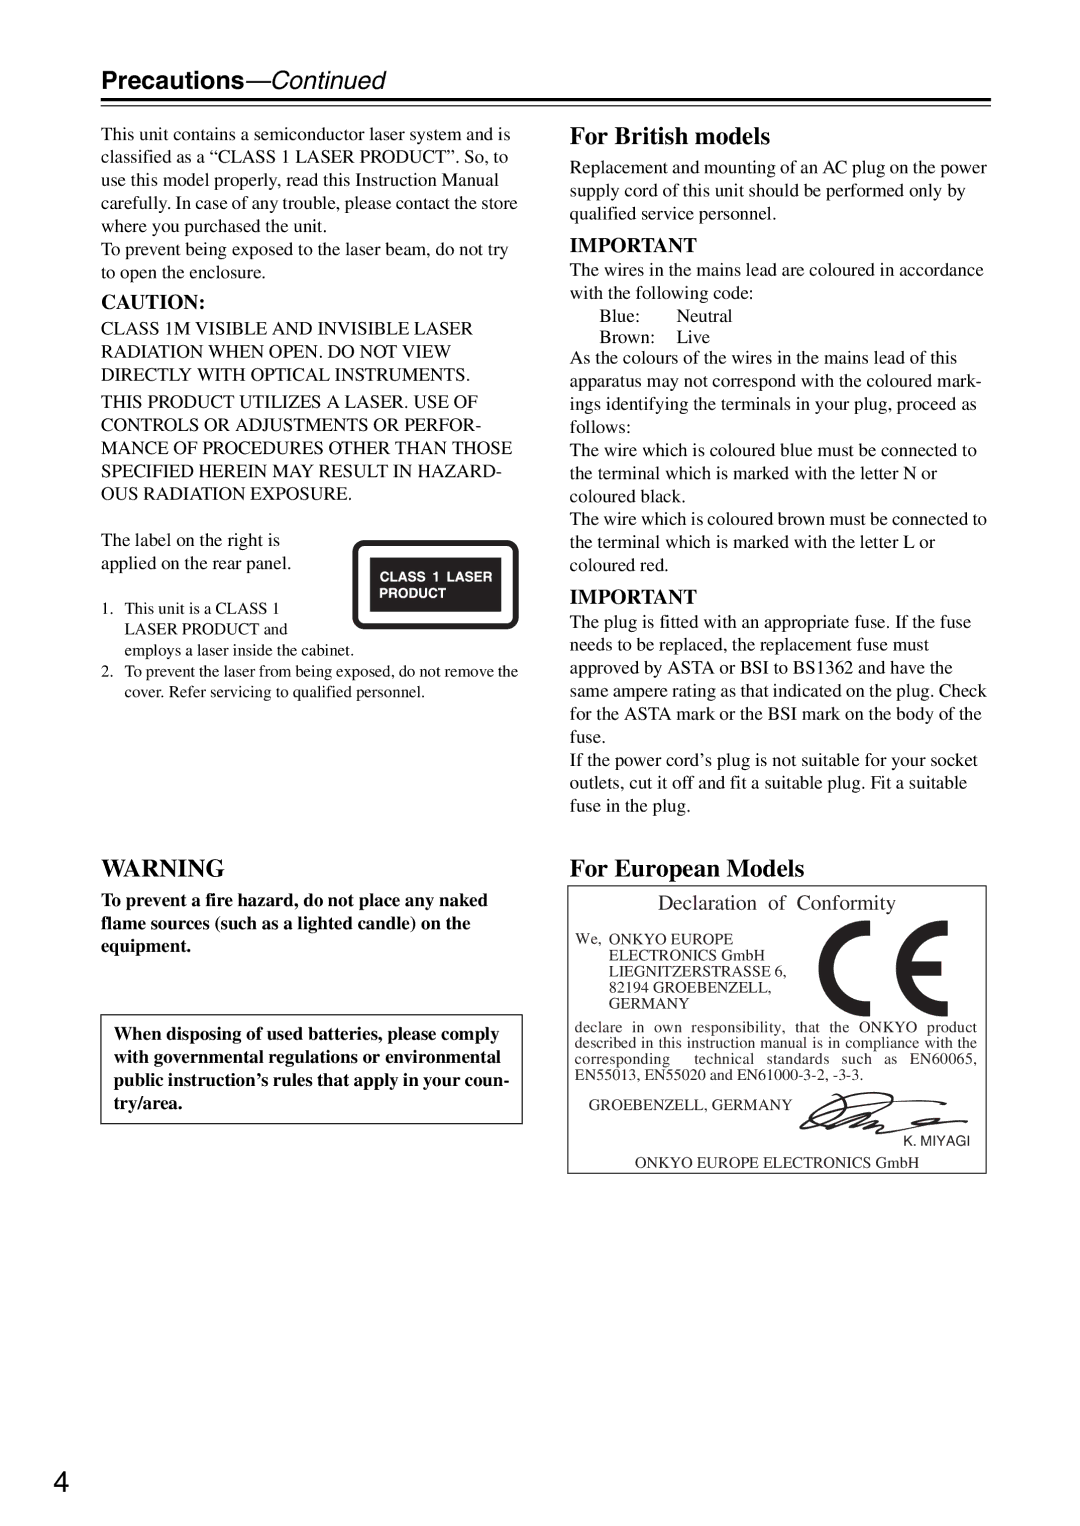 Onkyo DV-SP305 instruction manual Precautions, Label on the right is applied on the rear panel 